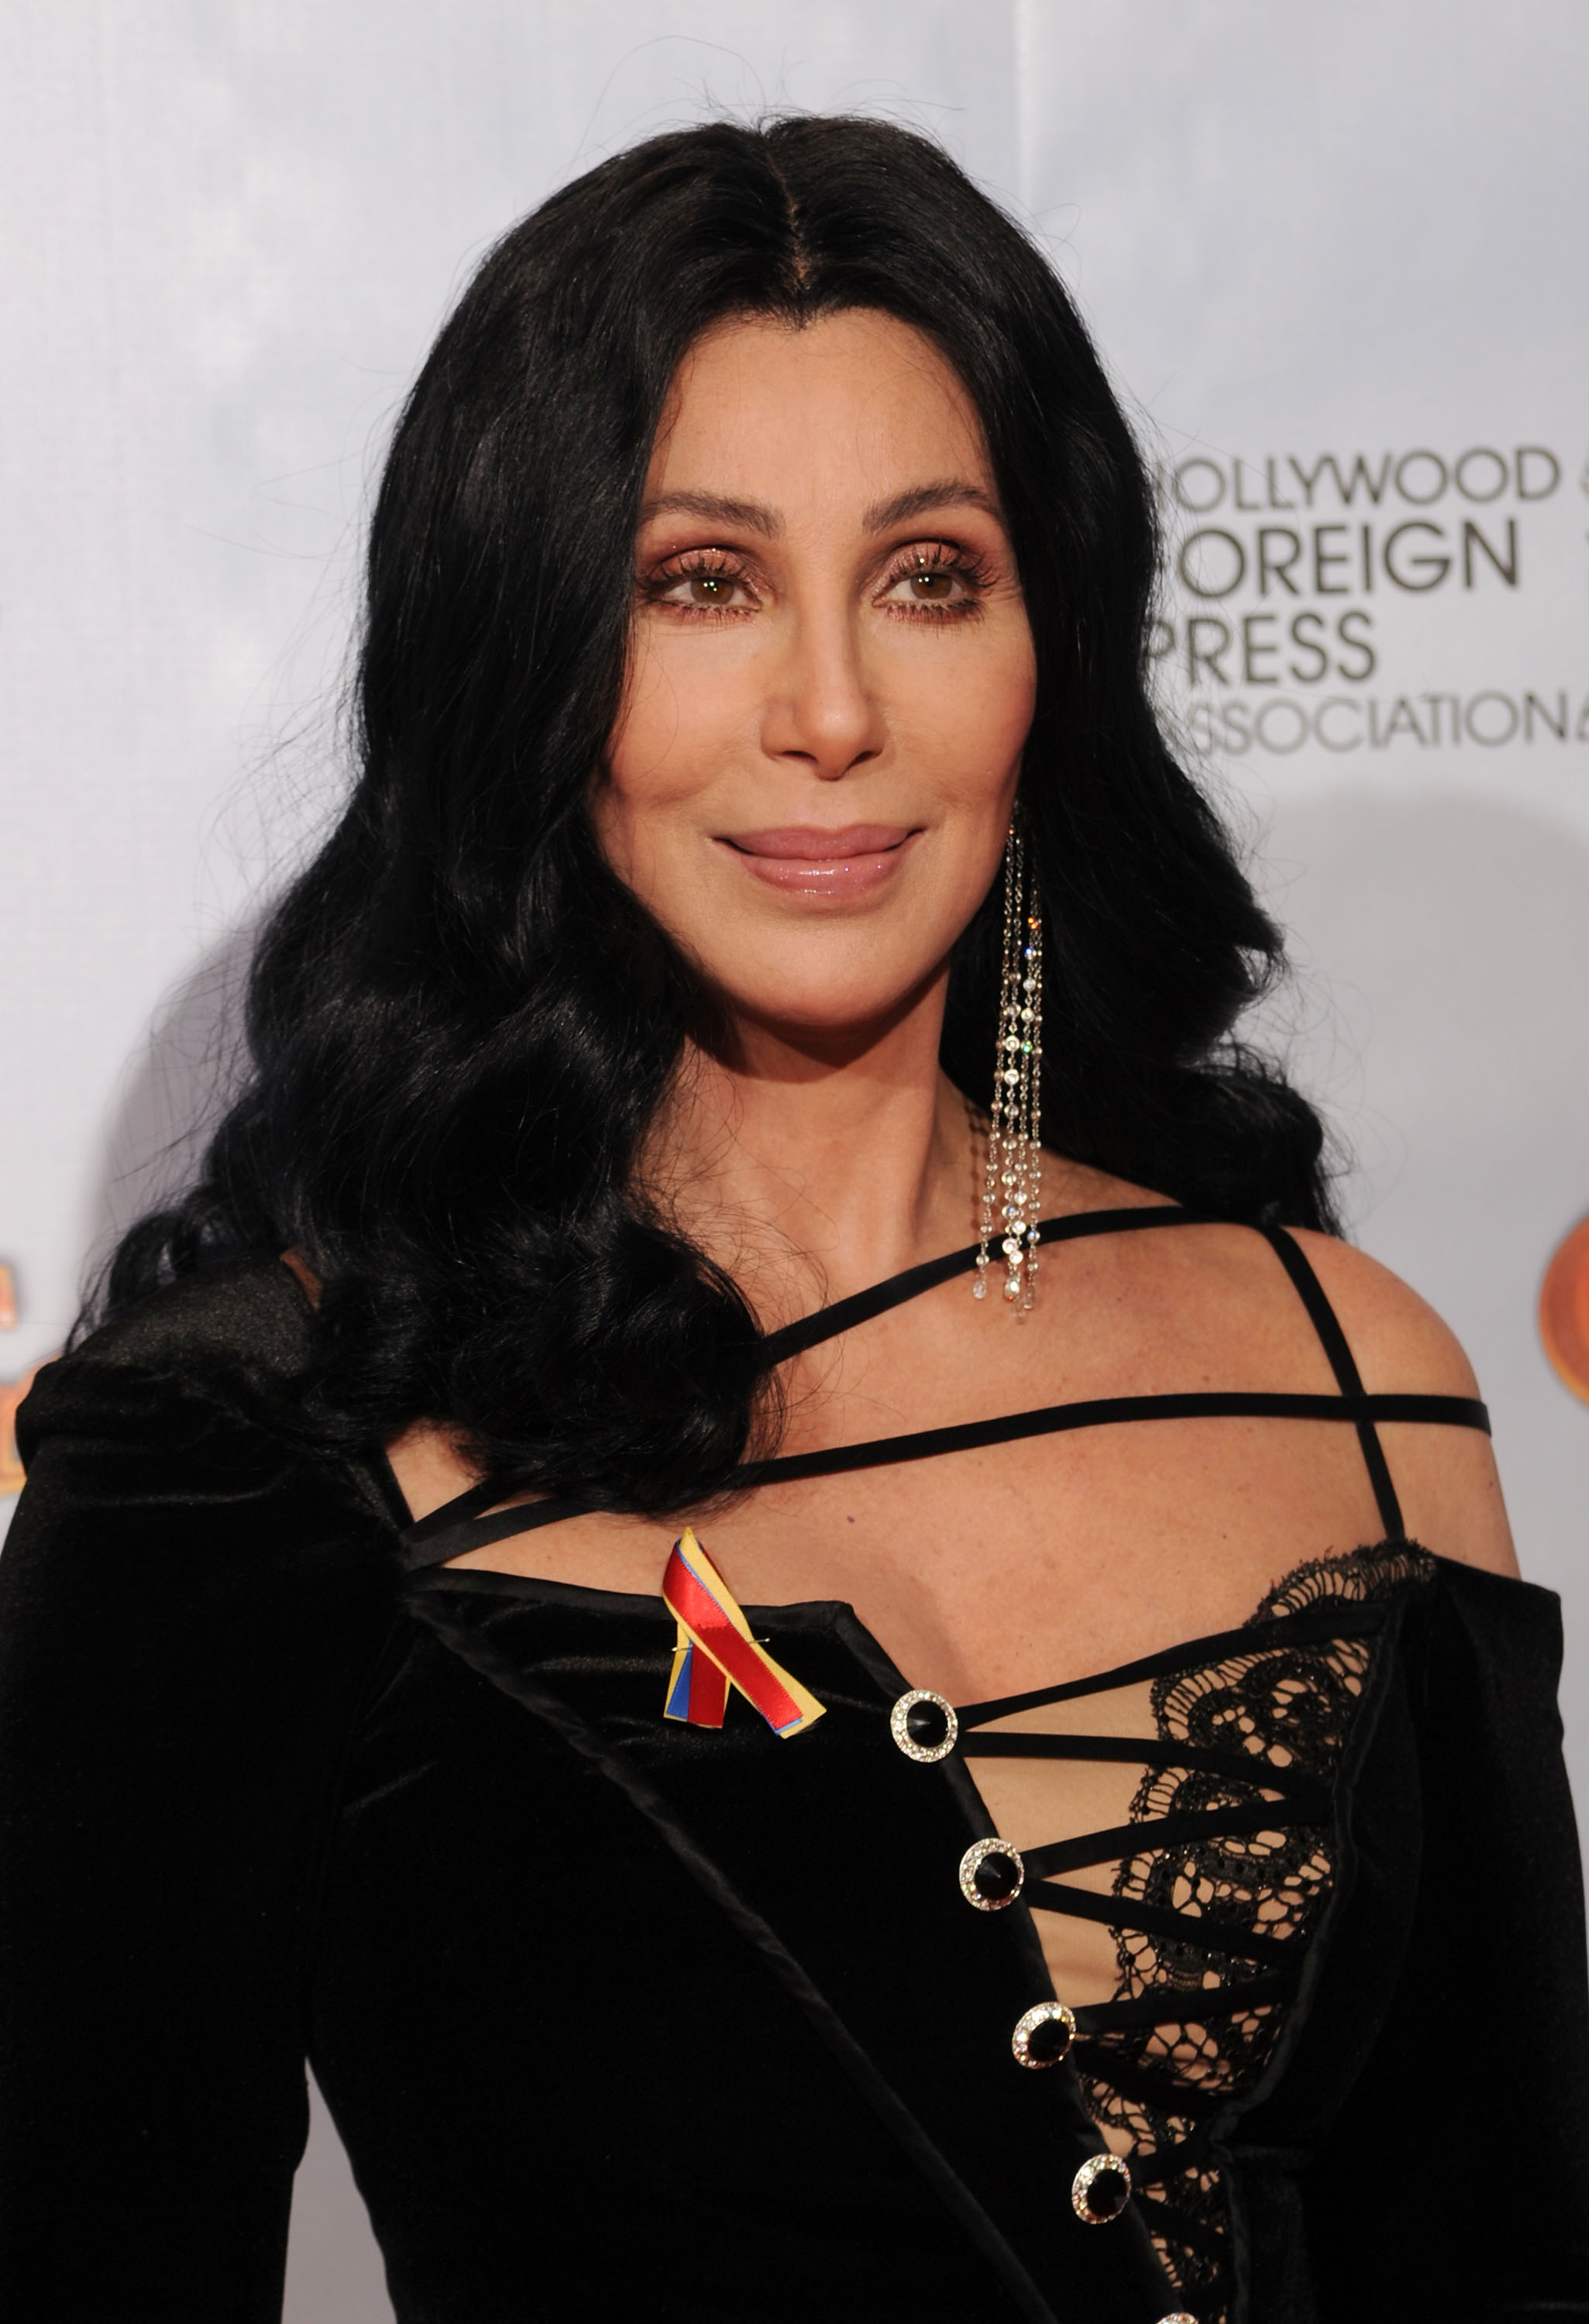 Cher on January 17, 2010 in Beverly Hills, California. | Source: Getty Images